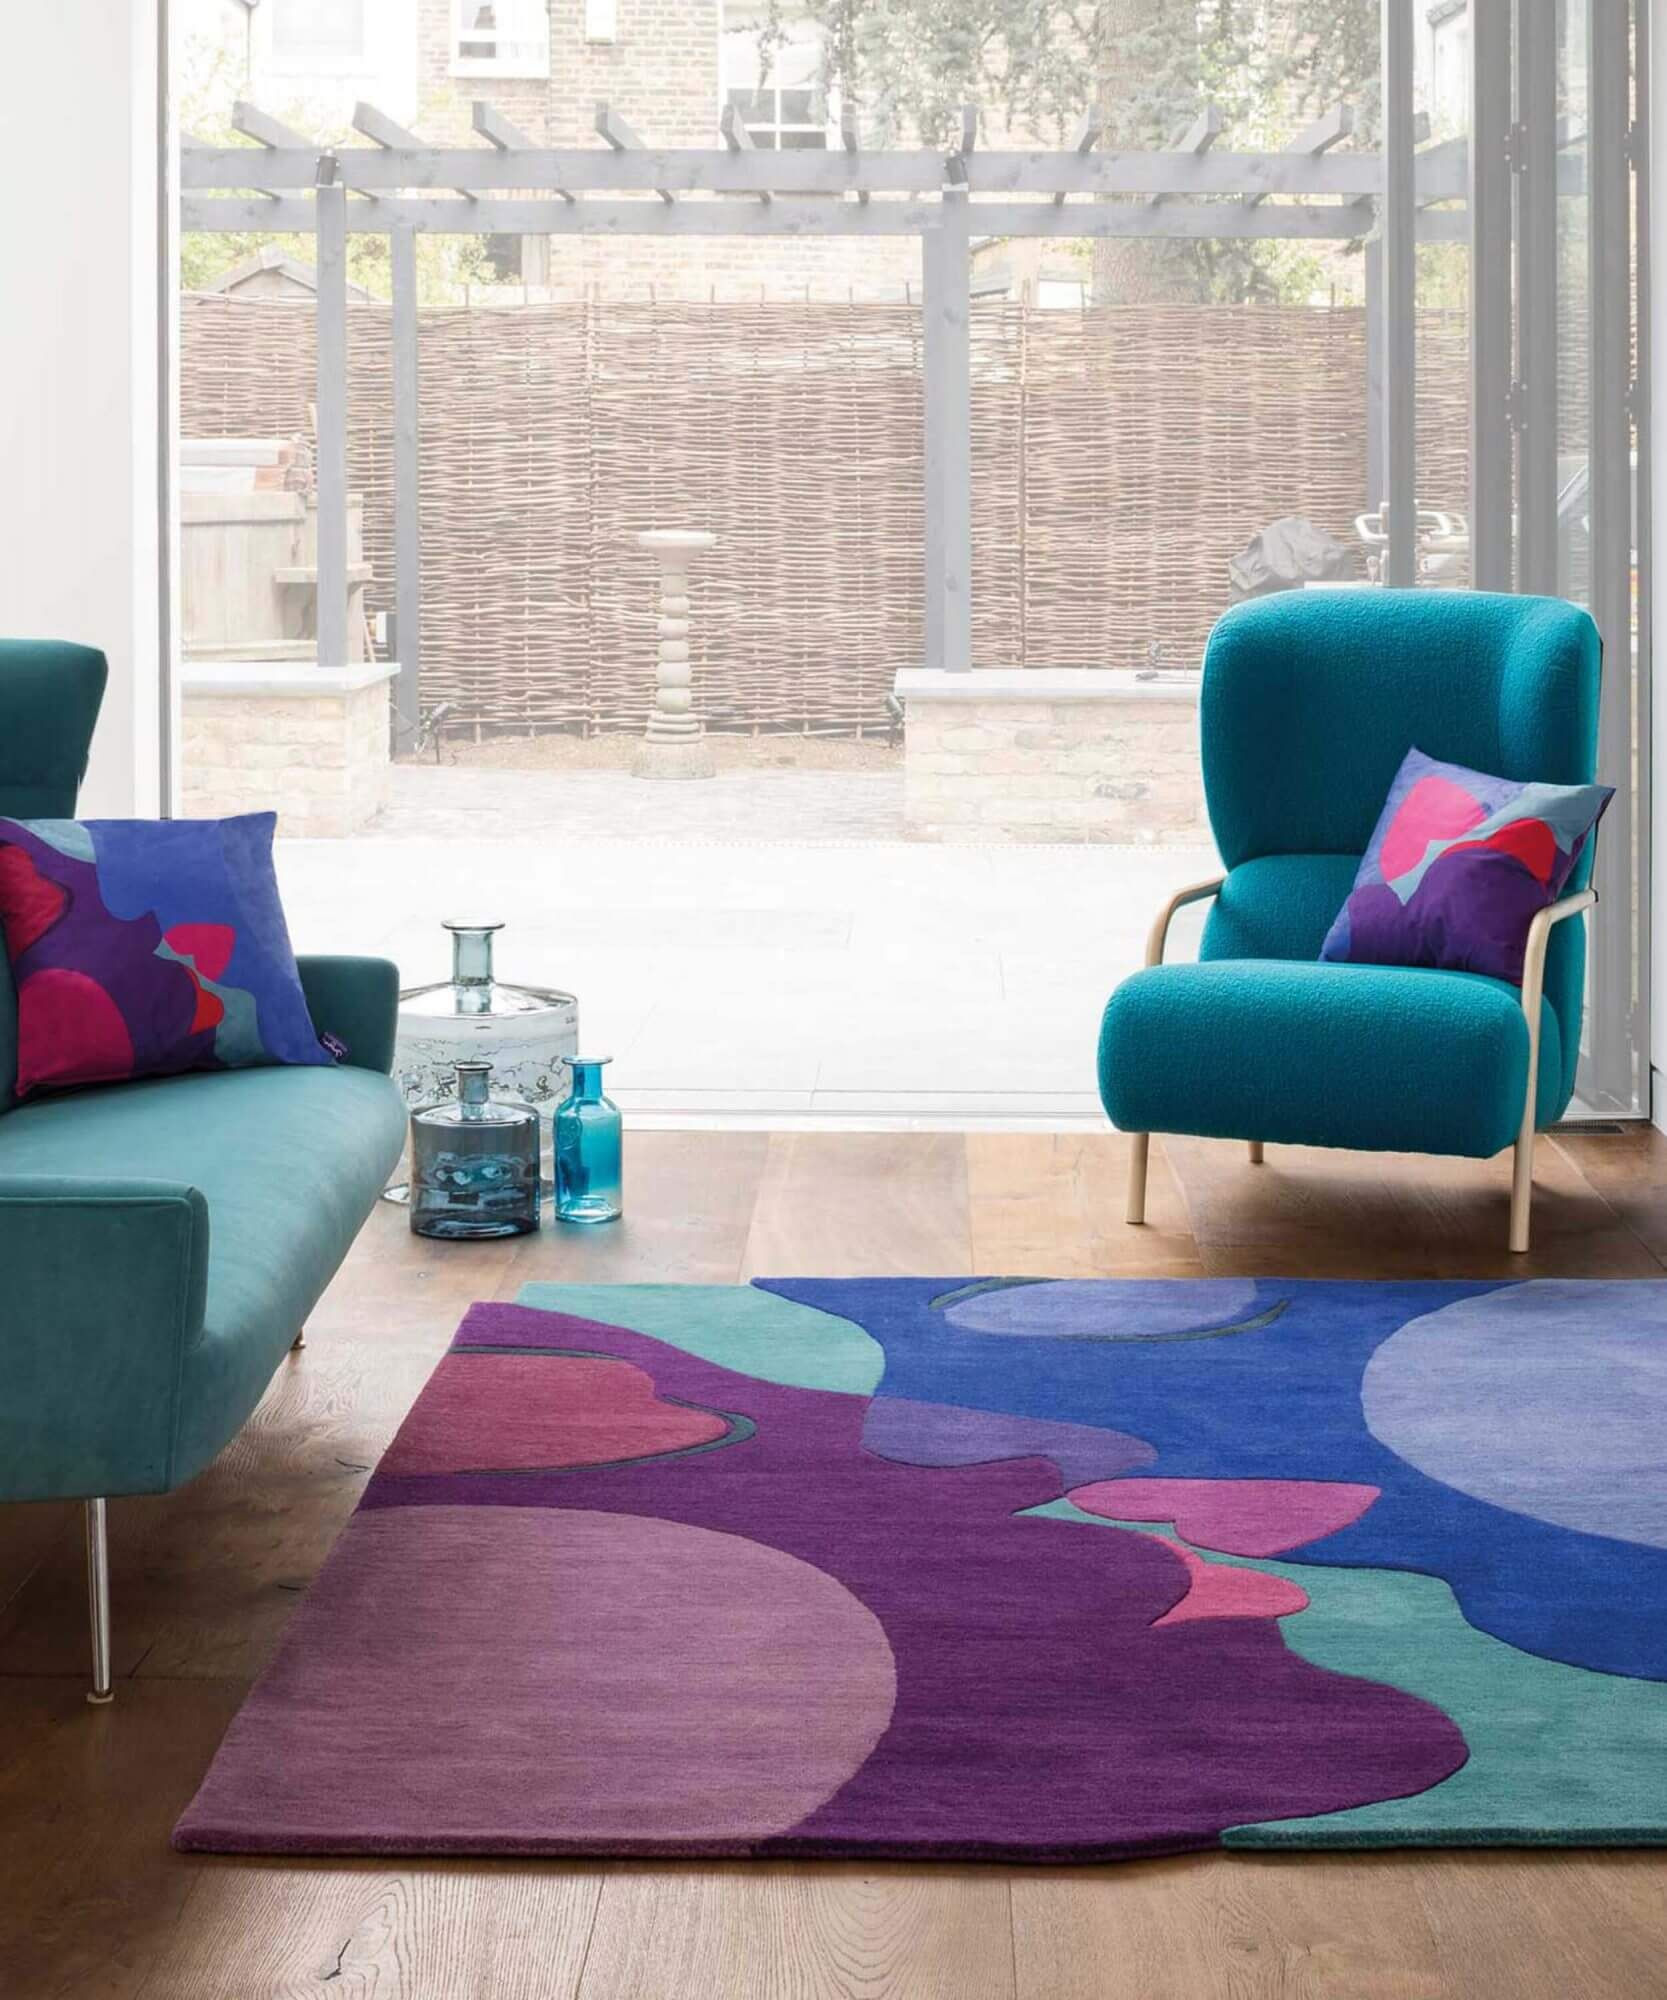 Turquoise Rug Living Room
 This Kiss Rug Turquoise in 2020